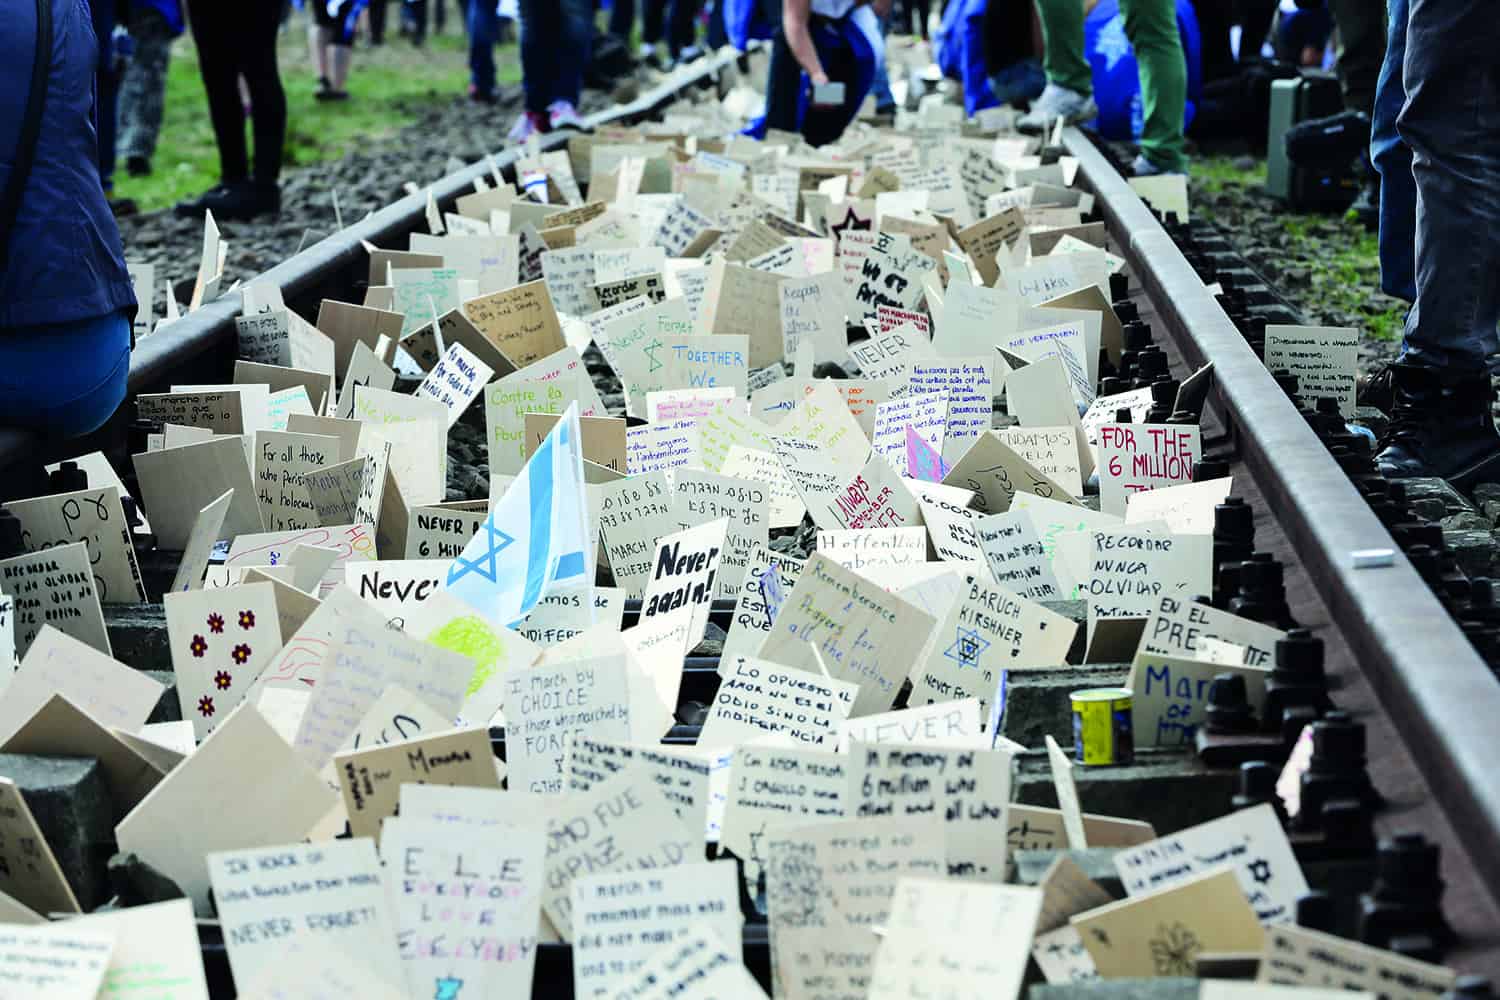 Hundreds of small tribute cards laid down in memoriam of the people lost in the Holocaust.